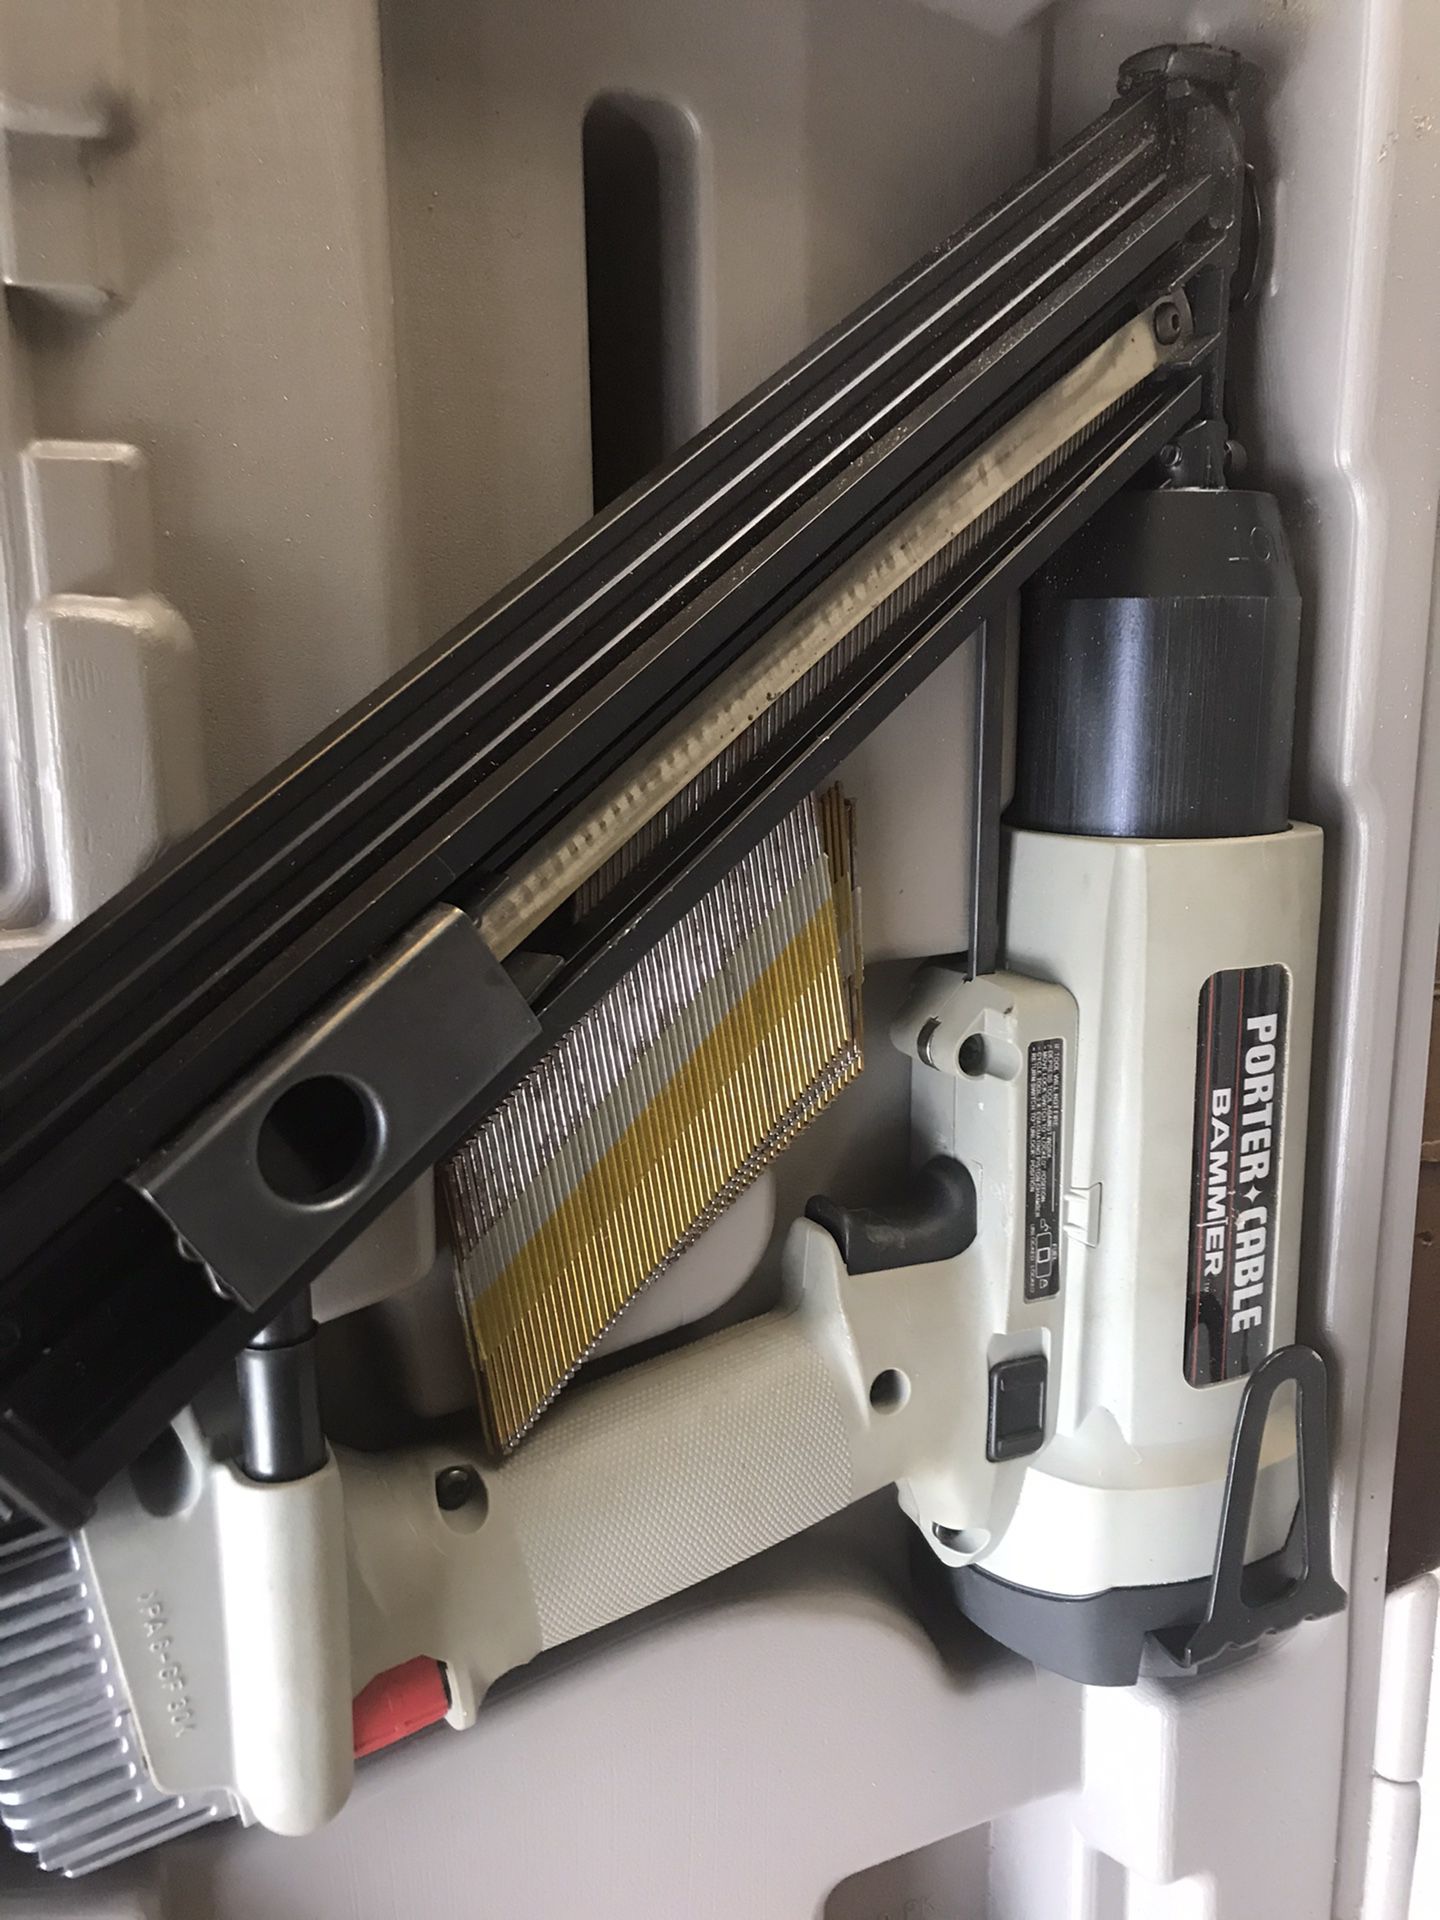 Large HD nail gun with case used very little like new